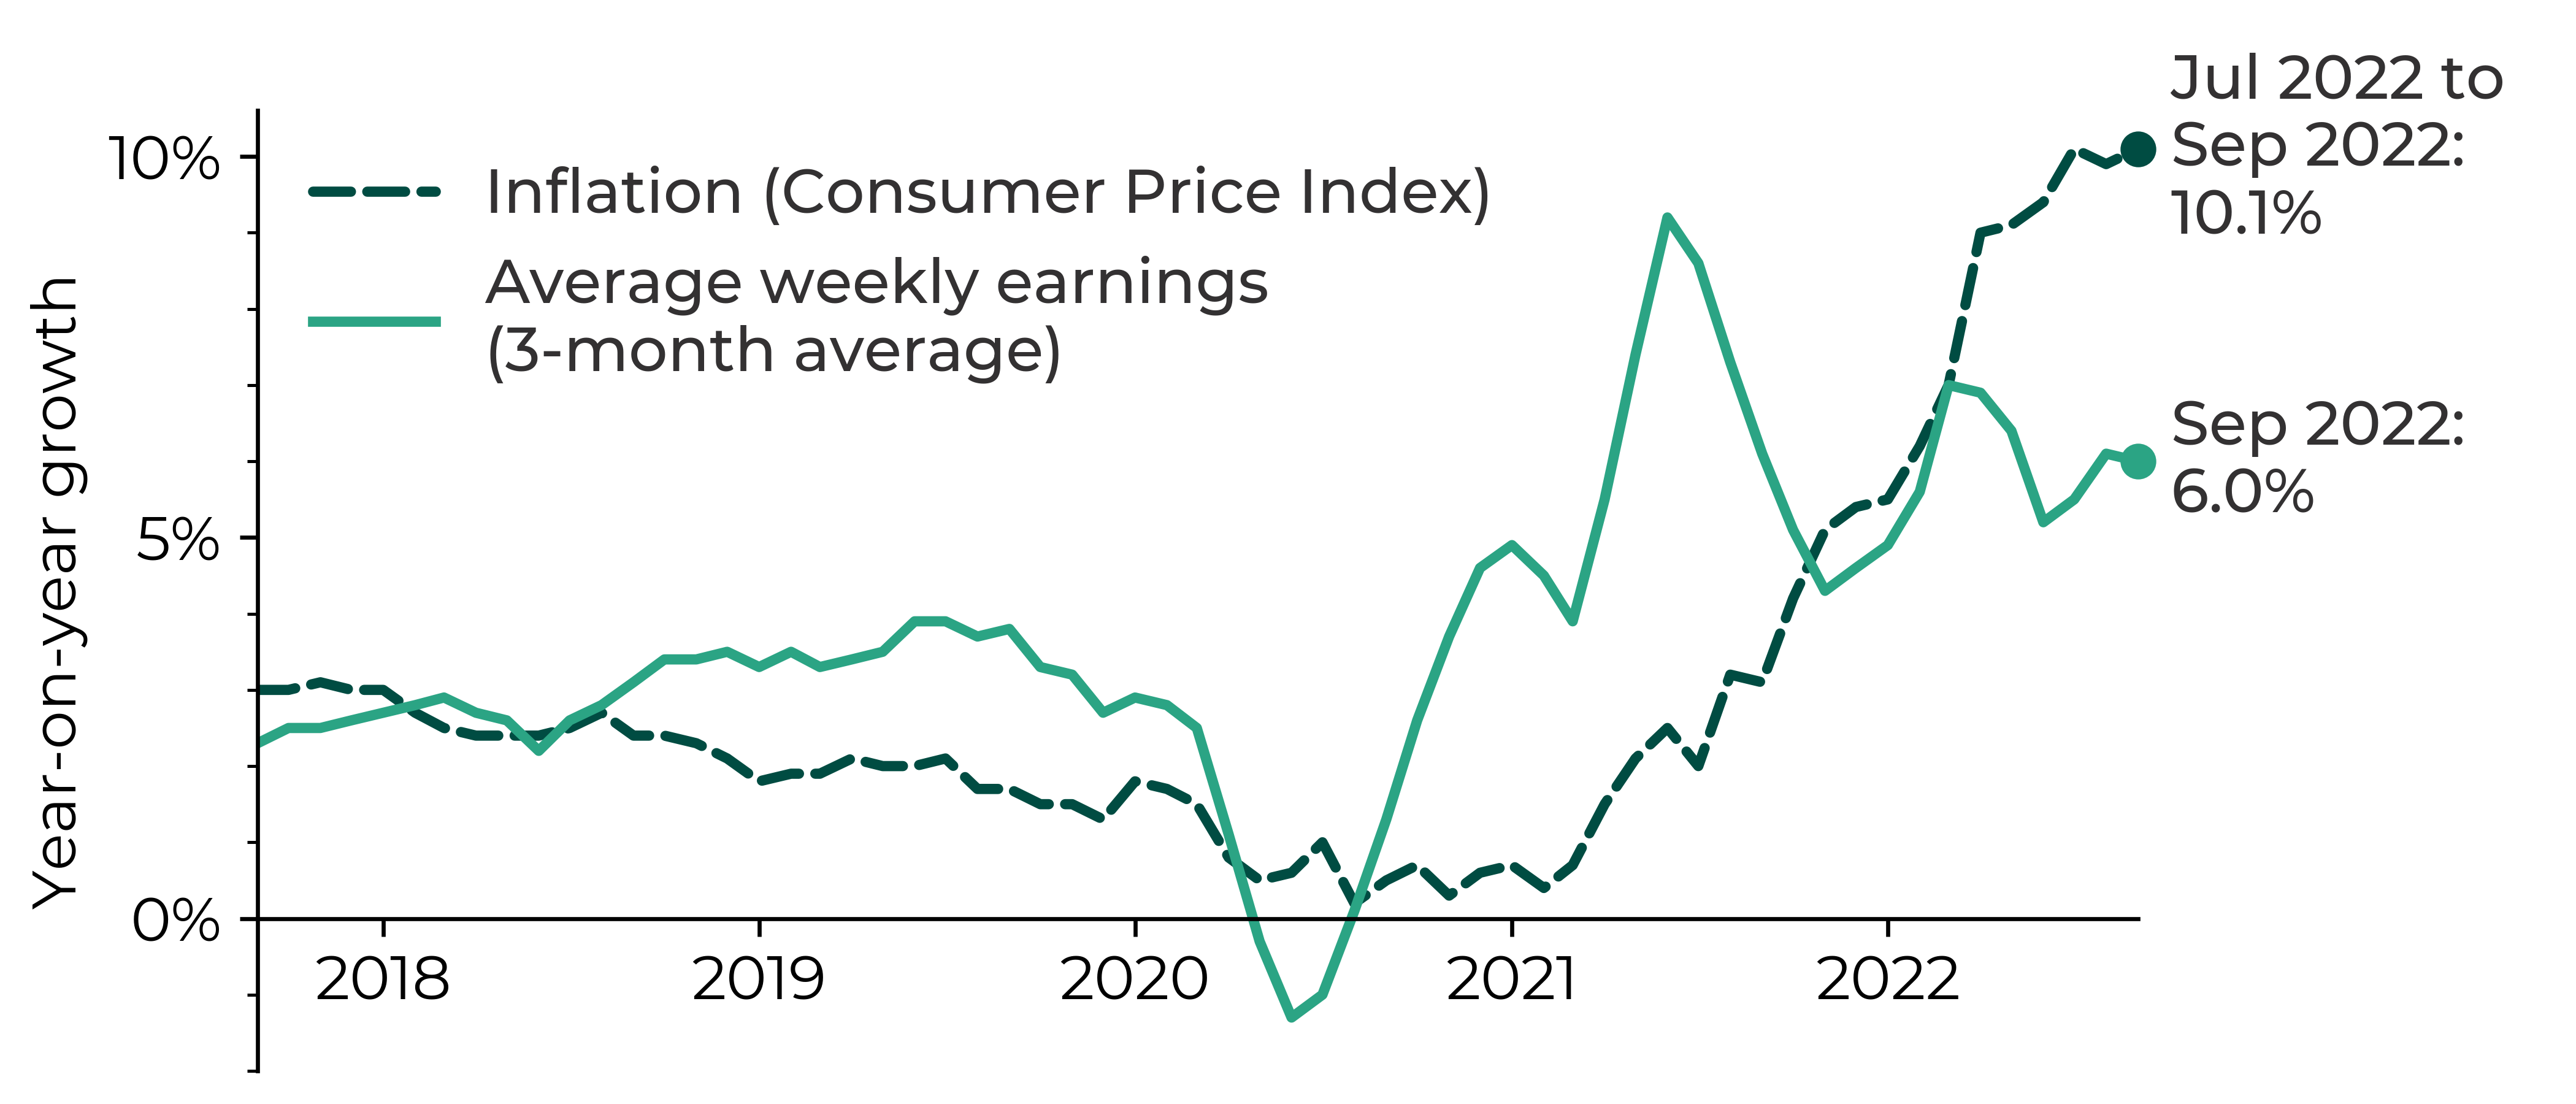 Graph showing UK inflation exceeding average weekly earnings (3-month average) in 2022. In September 2022, the average weekly earnings were 6.0% higher than for September 2021 whereas the Consumer Price Index inflation was at 10.1%.